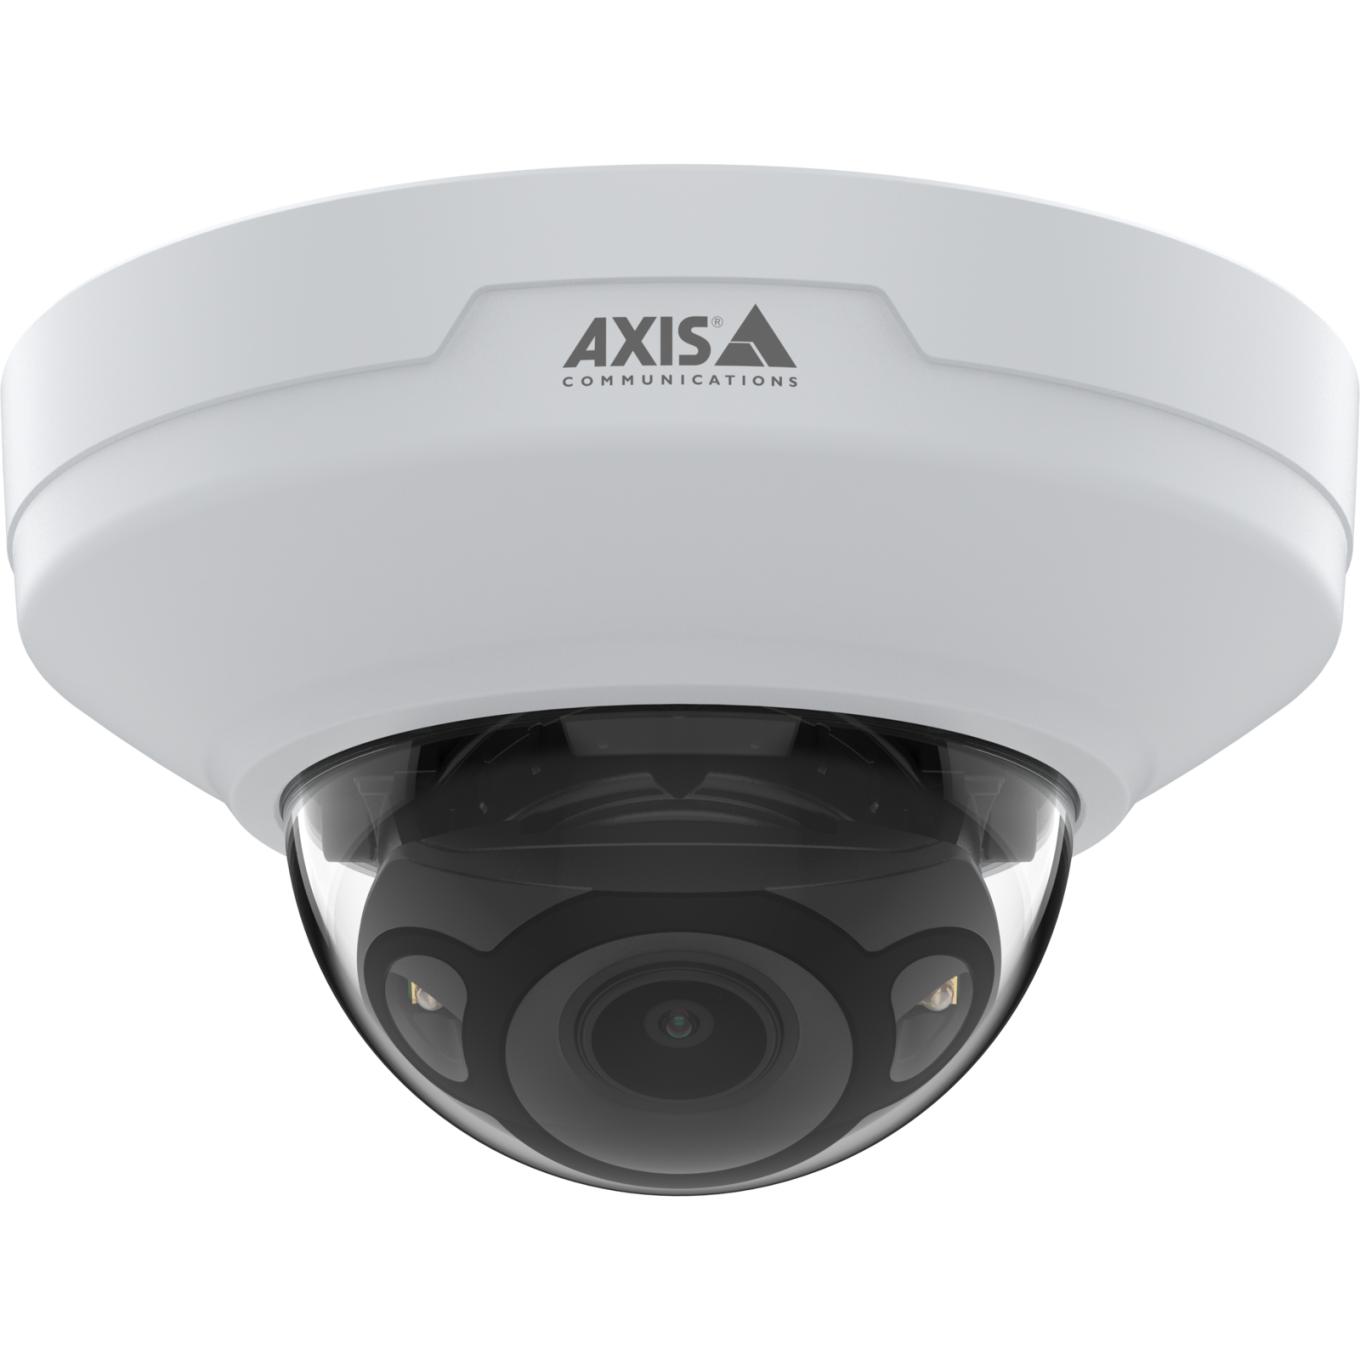 AXIS M4216-LV Dome Camera, ceiling, viewed from its front